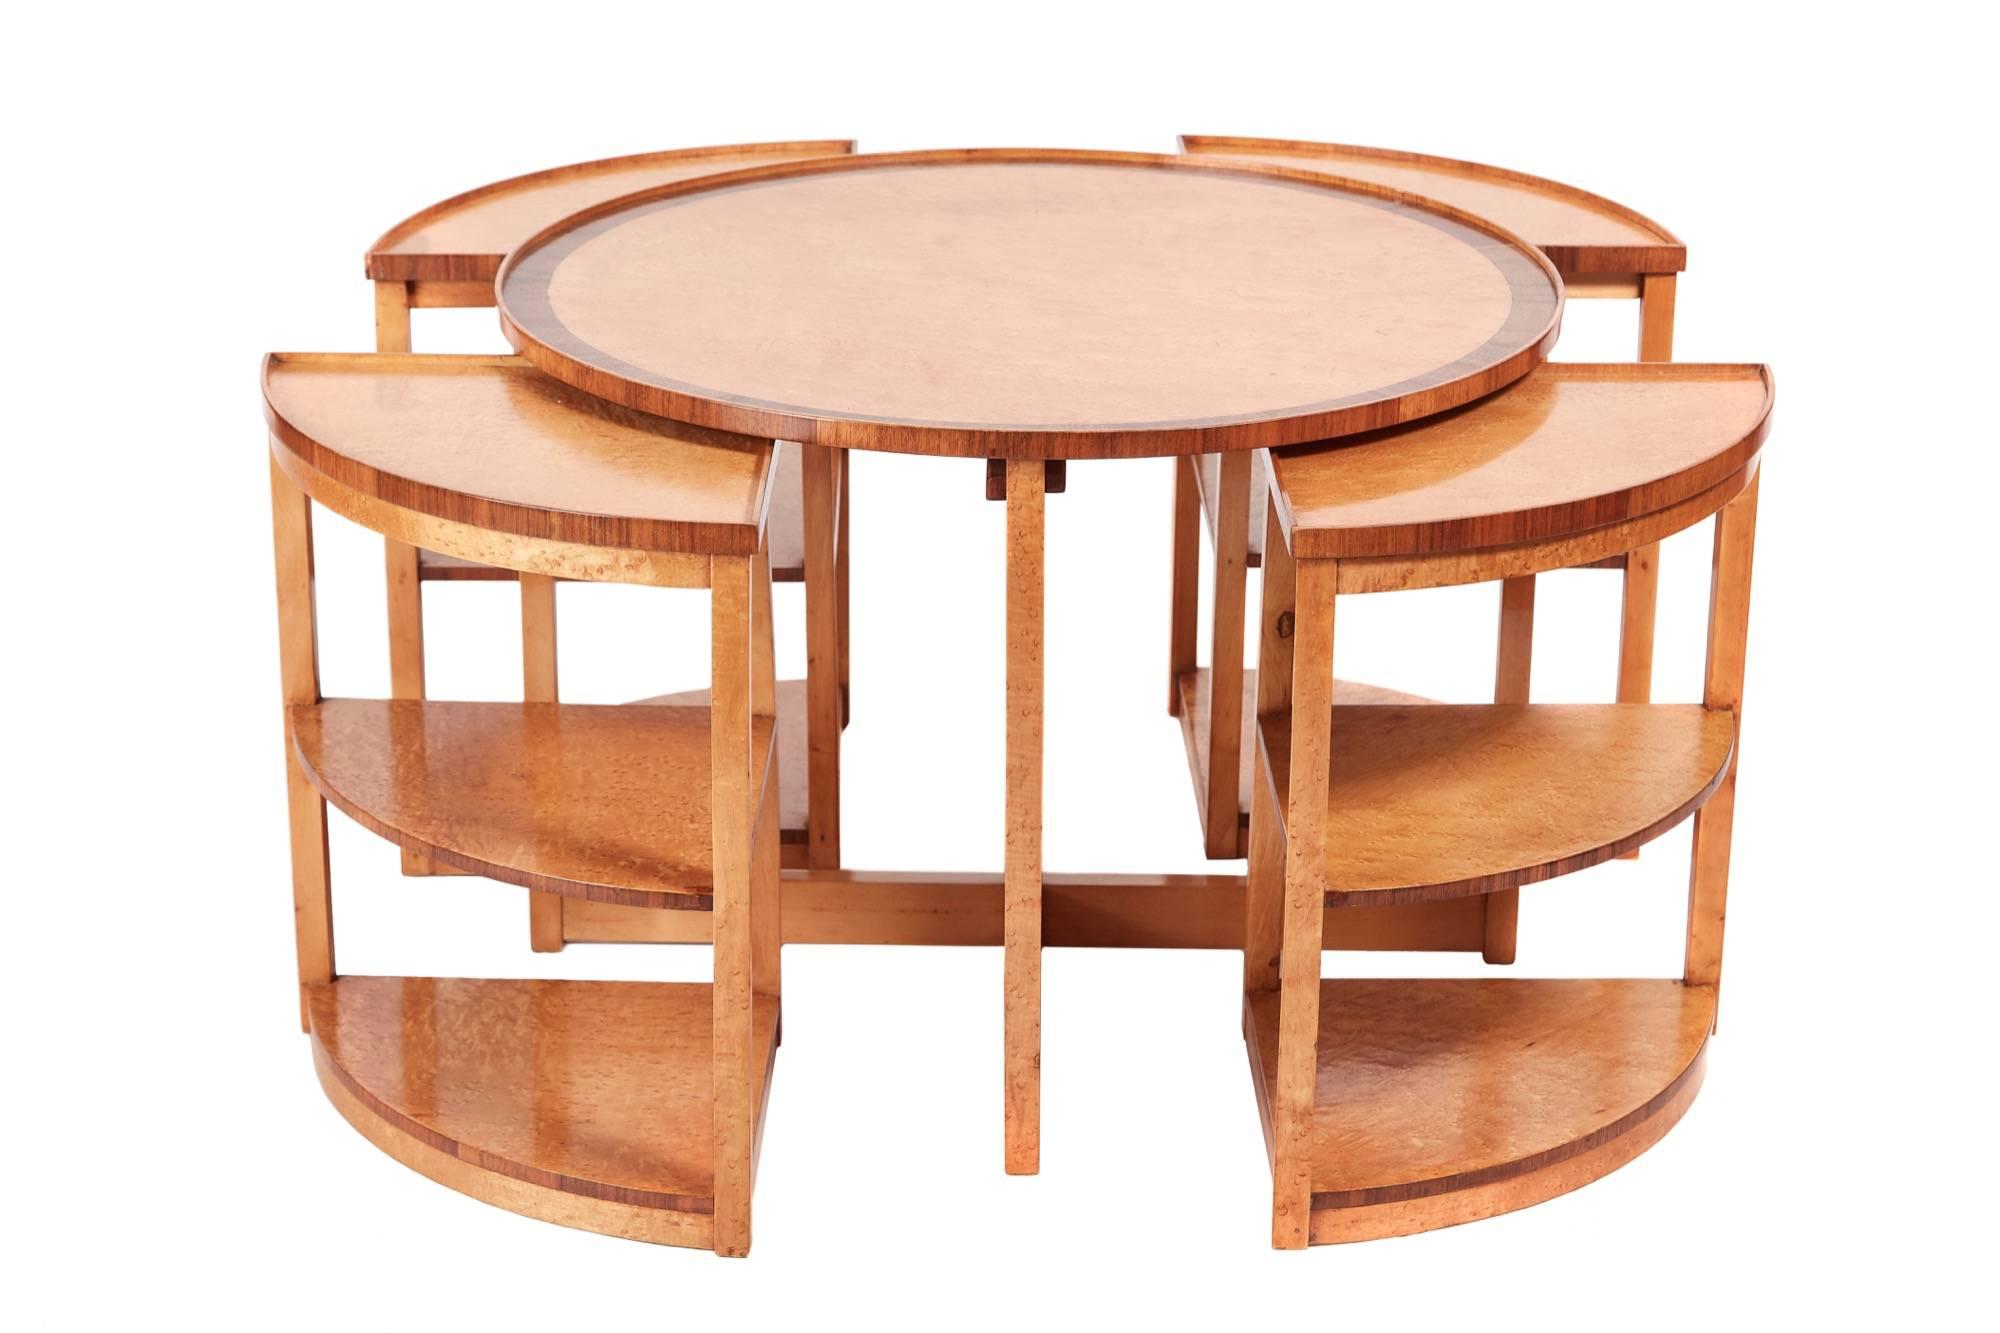 Quality Art Deco bird's-eye maple quartetto nest of tables, with fantastic bird's-eye maple tops crossbanded in walnut, one large round coffee table, four small shaped coffee/lamp tables, all in fantastic bird's-eye maple, standing on plinth